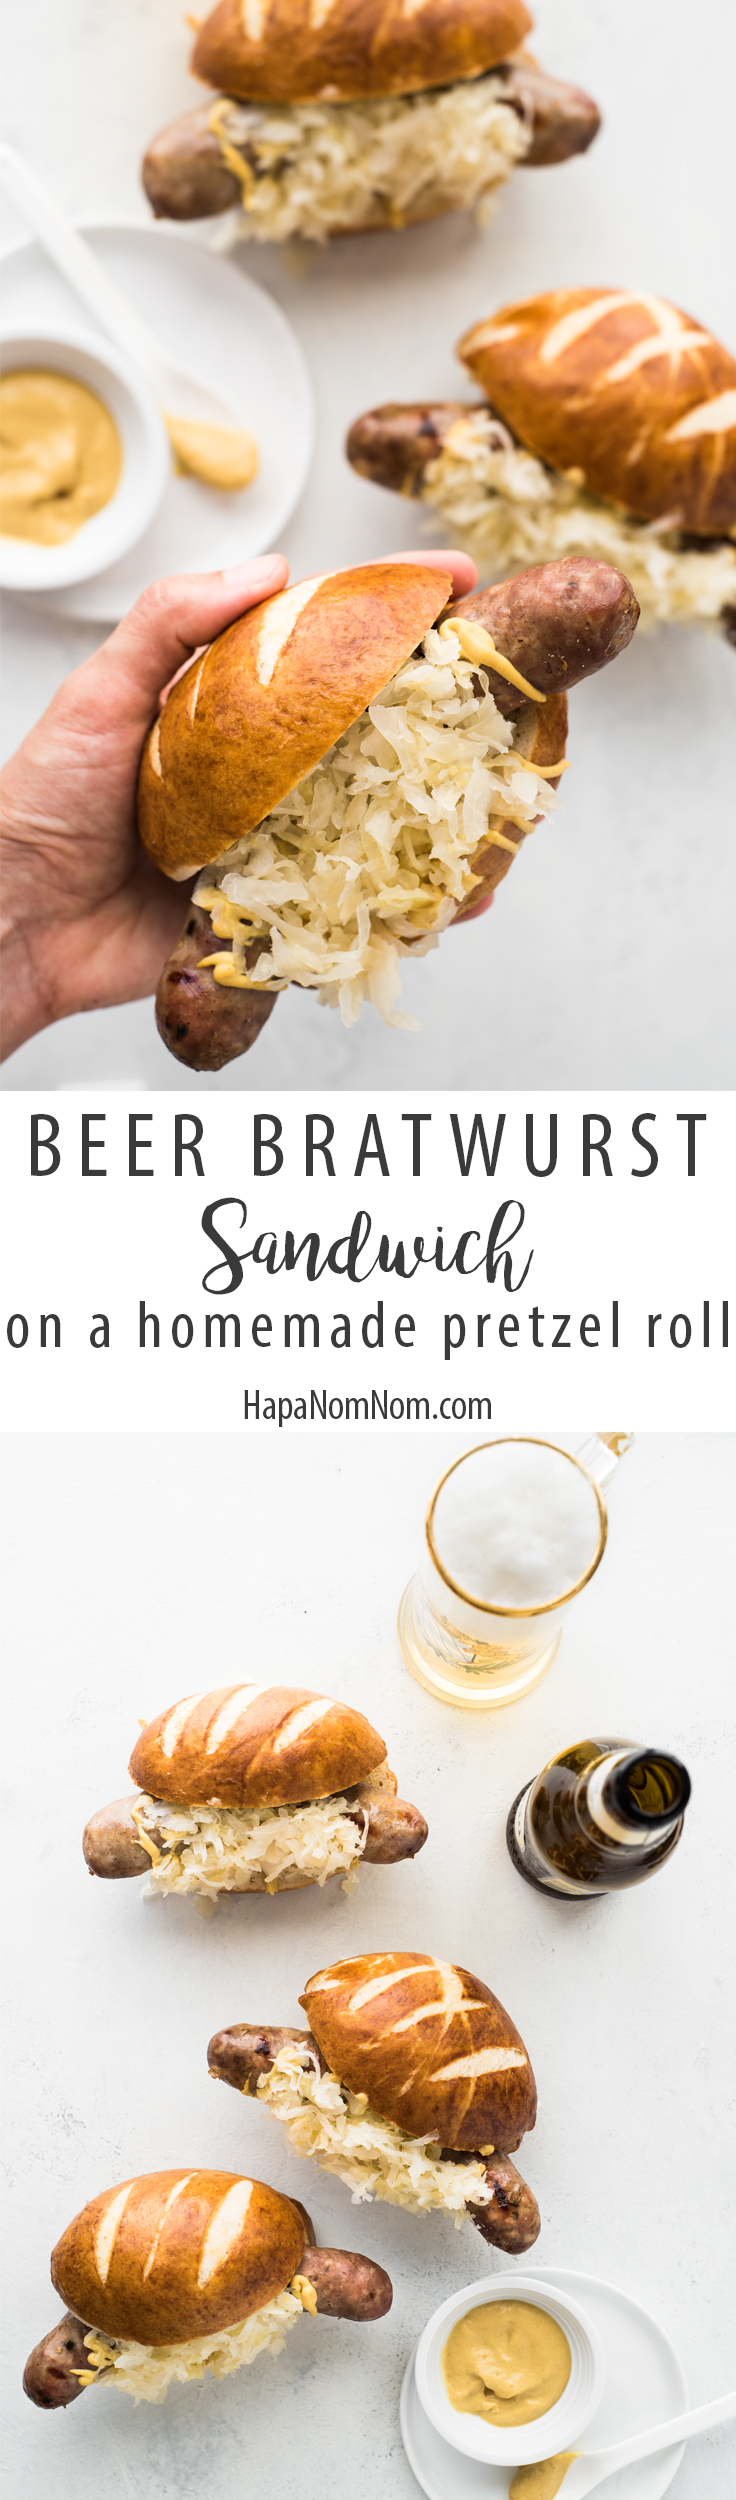 These beer brats are perfect for Oktoberfest, football parties, or just a damn good dinner!